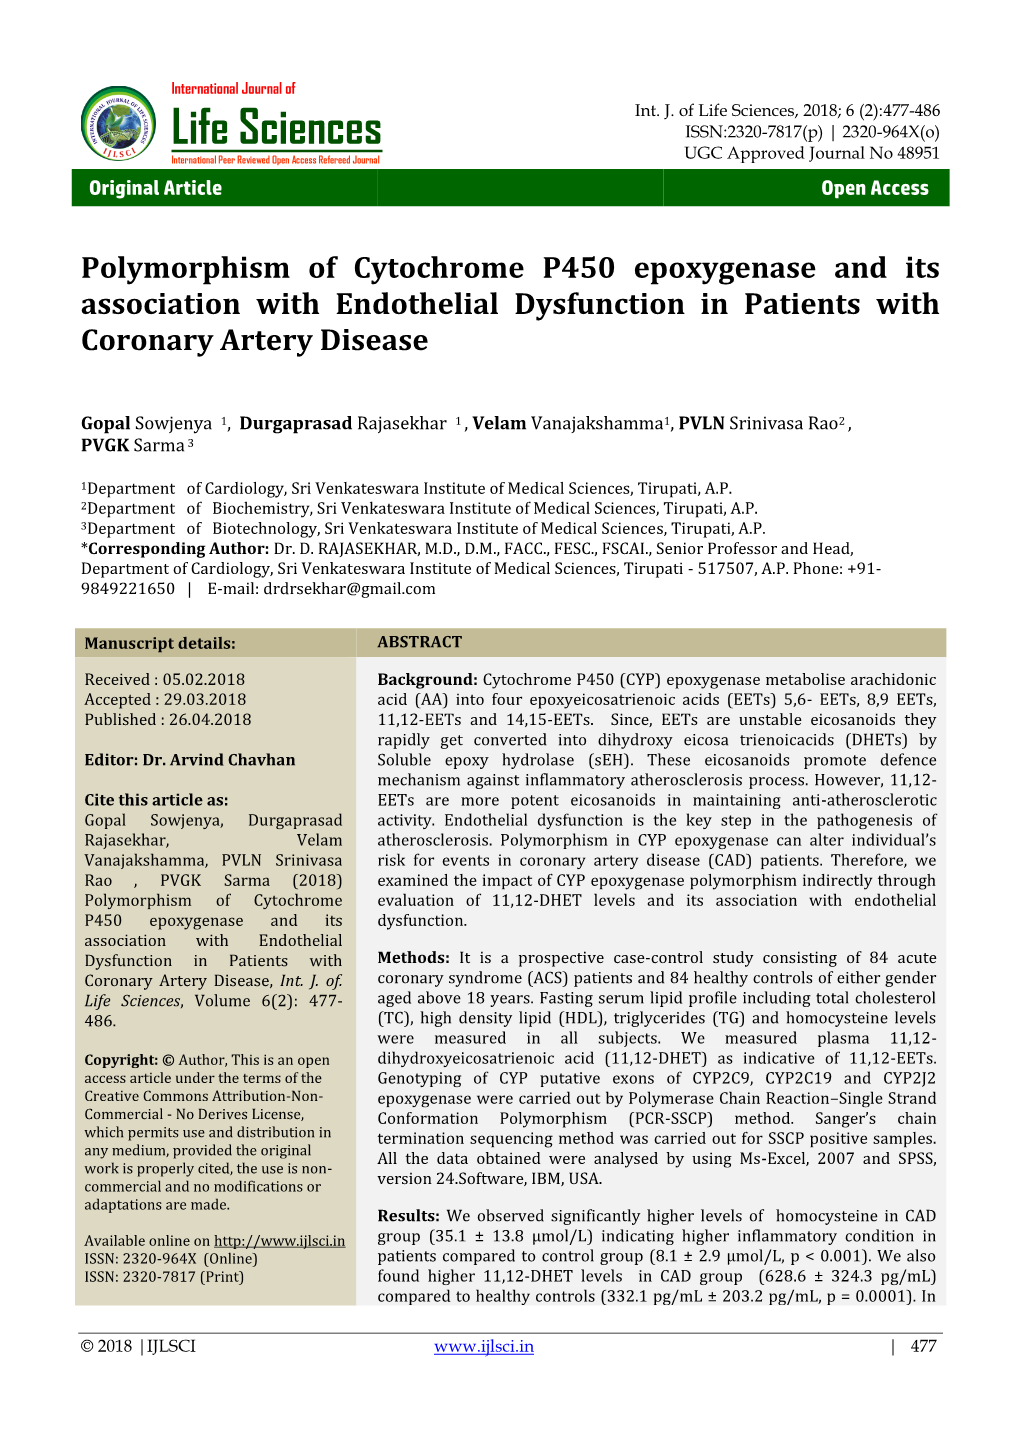 Polymorphism of Cytochrome P450 Epoxygenase and Its Association with Endothelial Dysfunction in Patients with Coronary Artery Disease